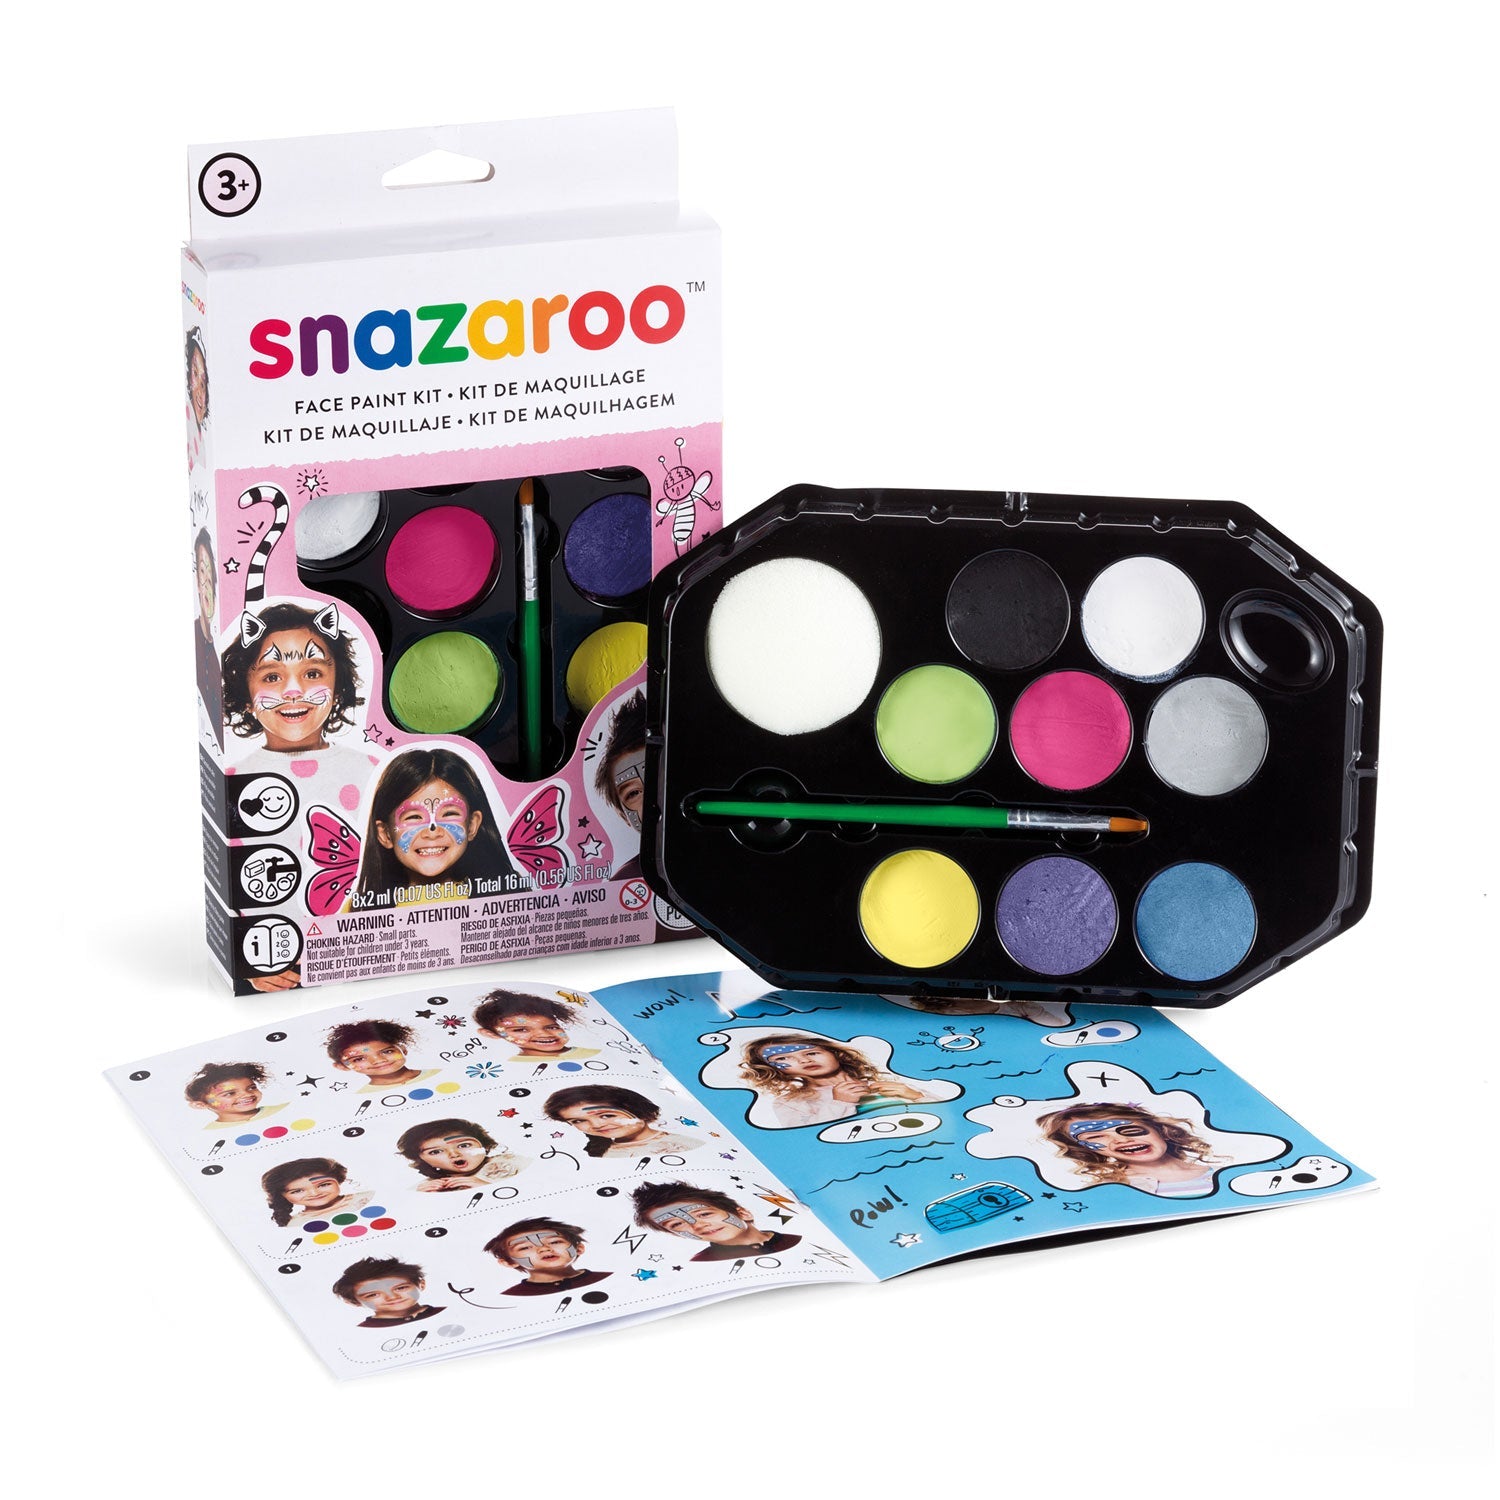 Snazaroo Girl Face Painting Kit includes 2ml White, Fuchsia Pink, Turquoise, Pale Green, Pale Yellow, Metallic Silver, Sparkle Blue and Sparkle Lilac, Brush, Sponge and Step-by-step face painting guide. Paints up to 50 faces.